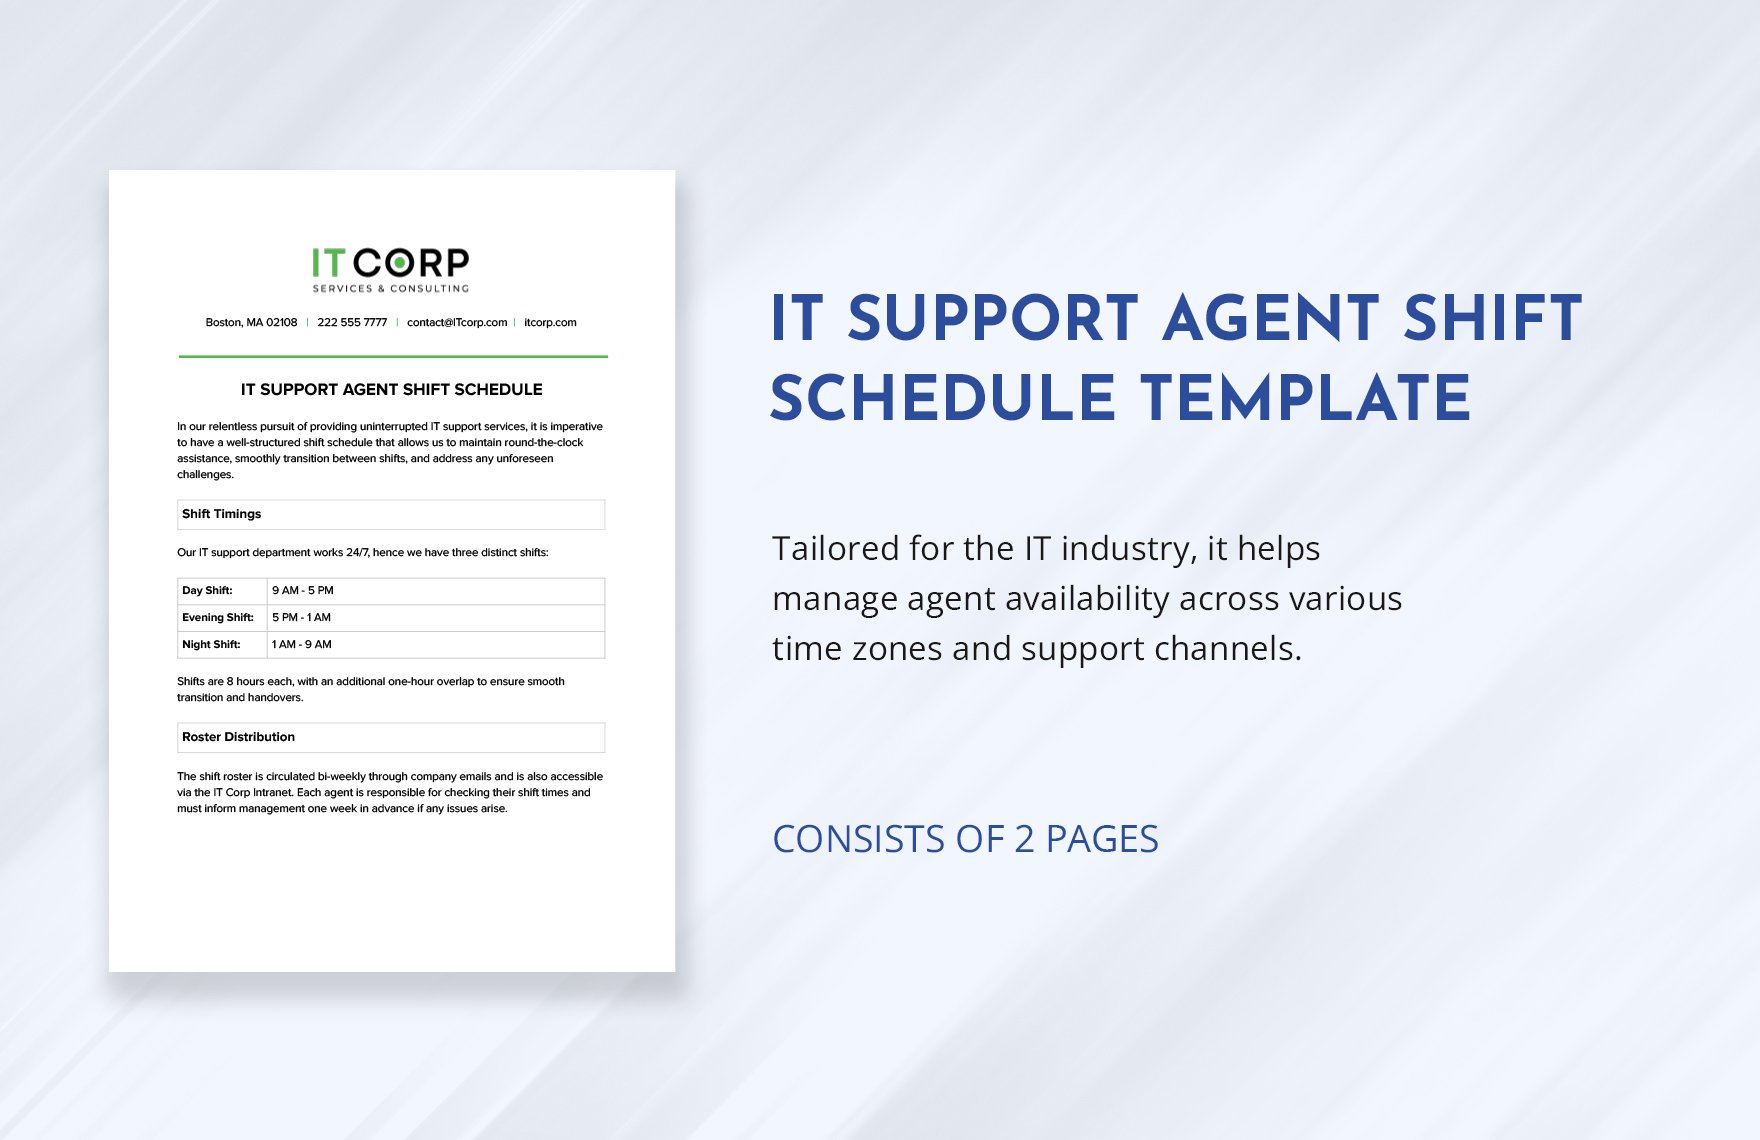 IT Support Agent Shift Schedule Template